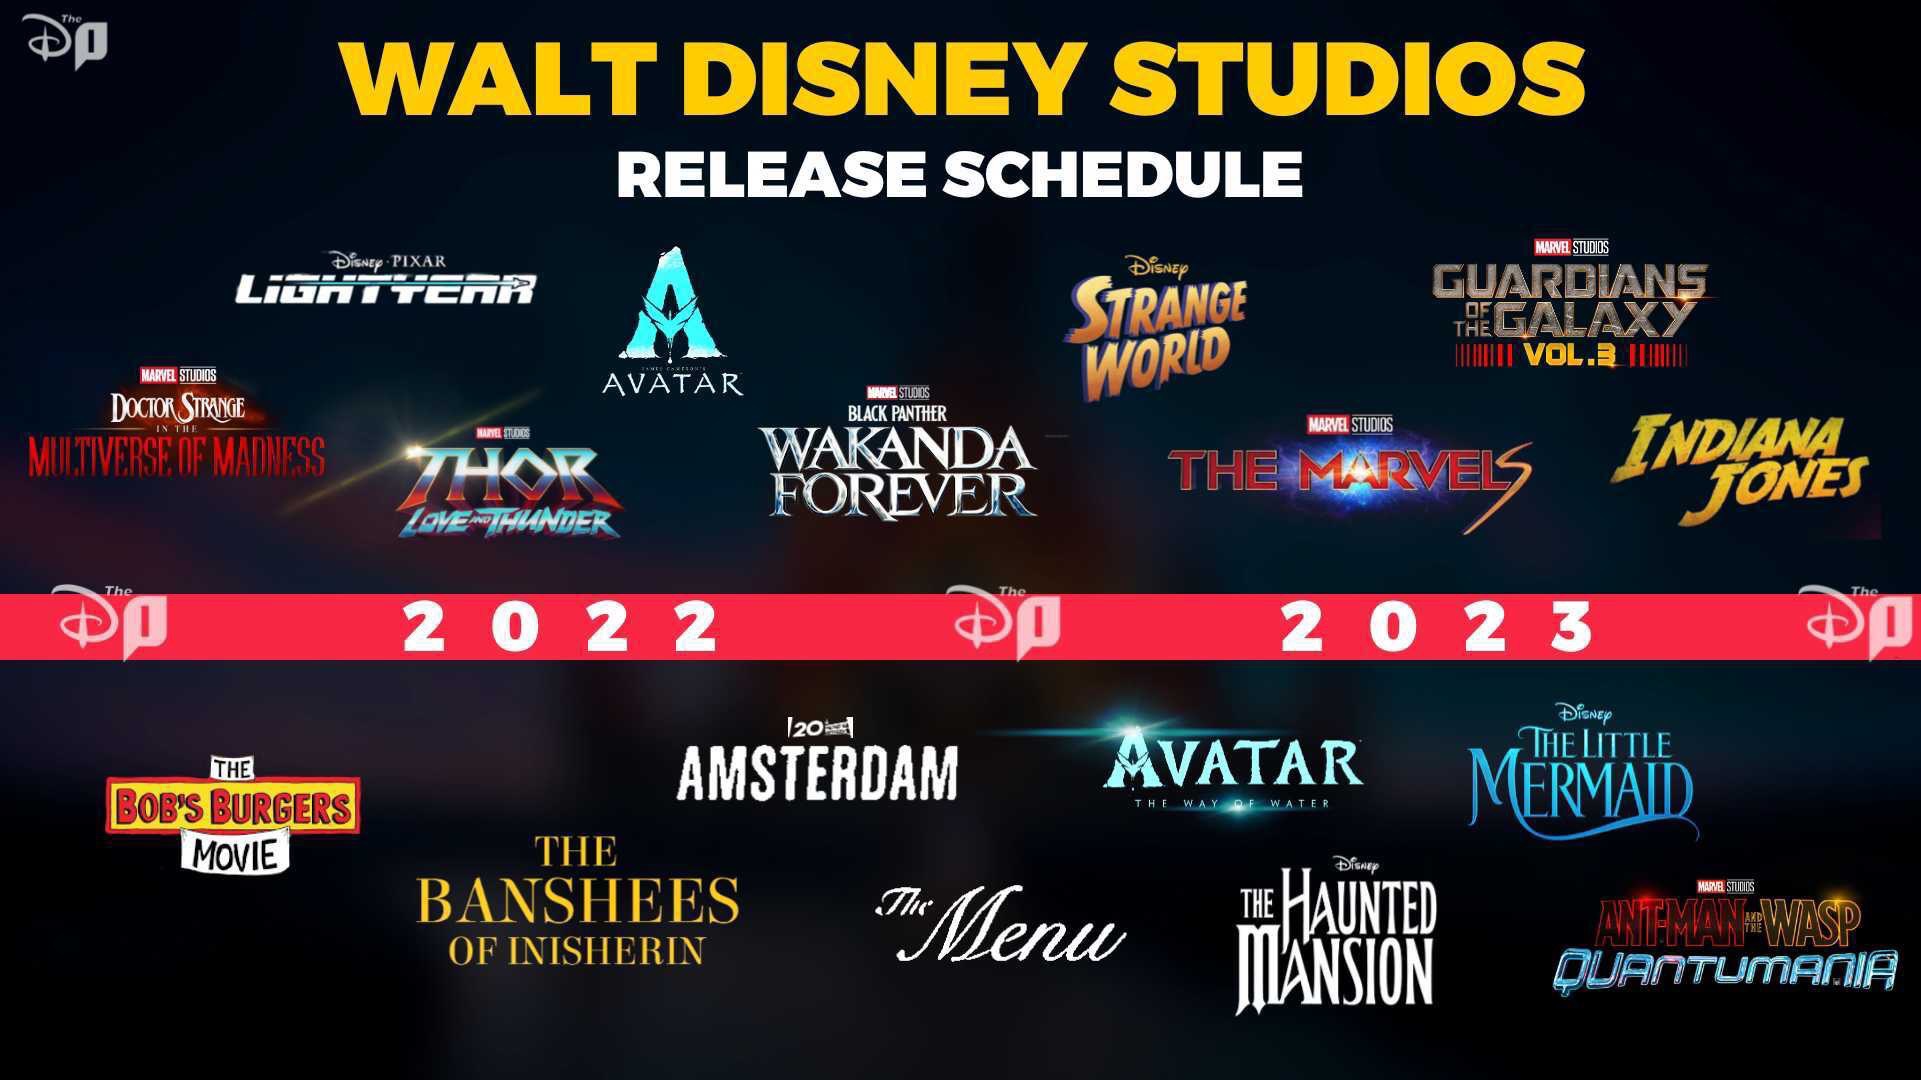 ICYMI: Here is What Disney Showed Off at CinemaCon